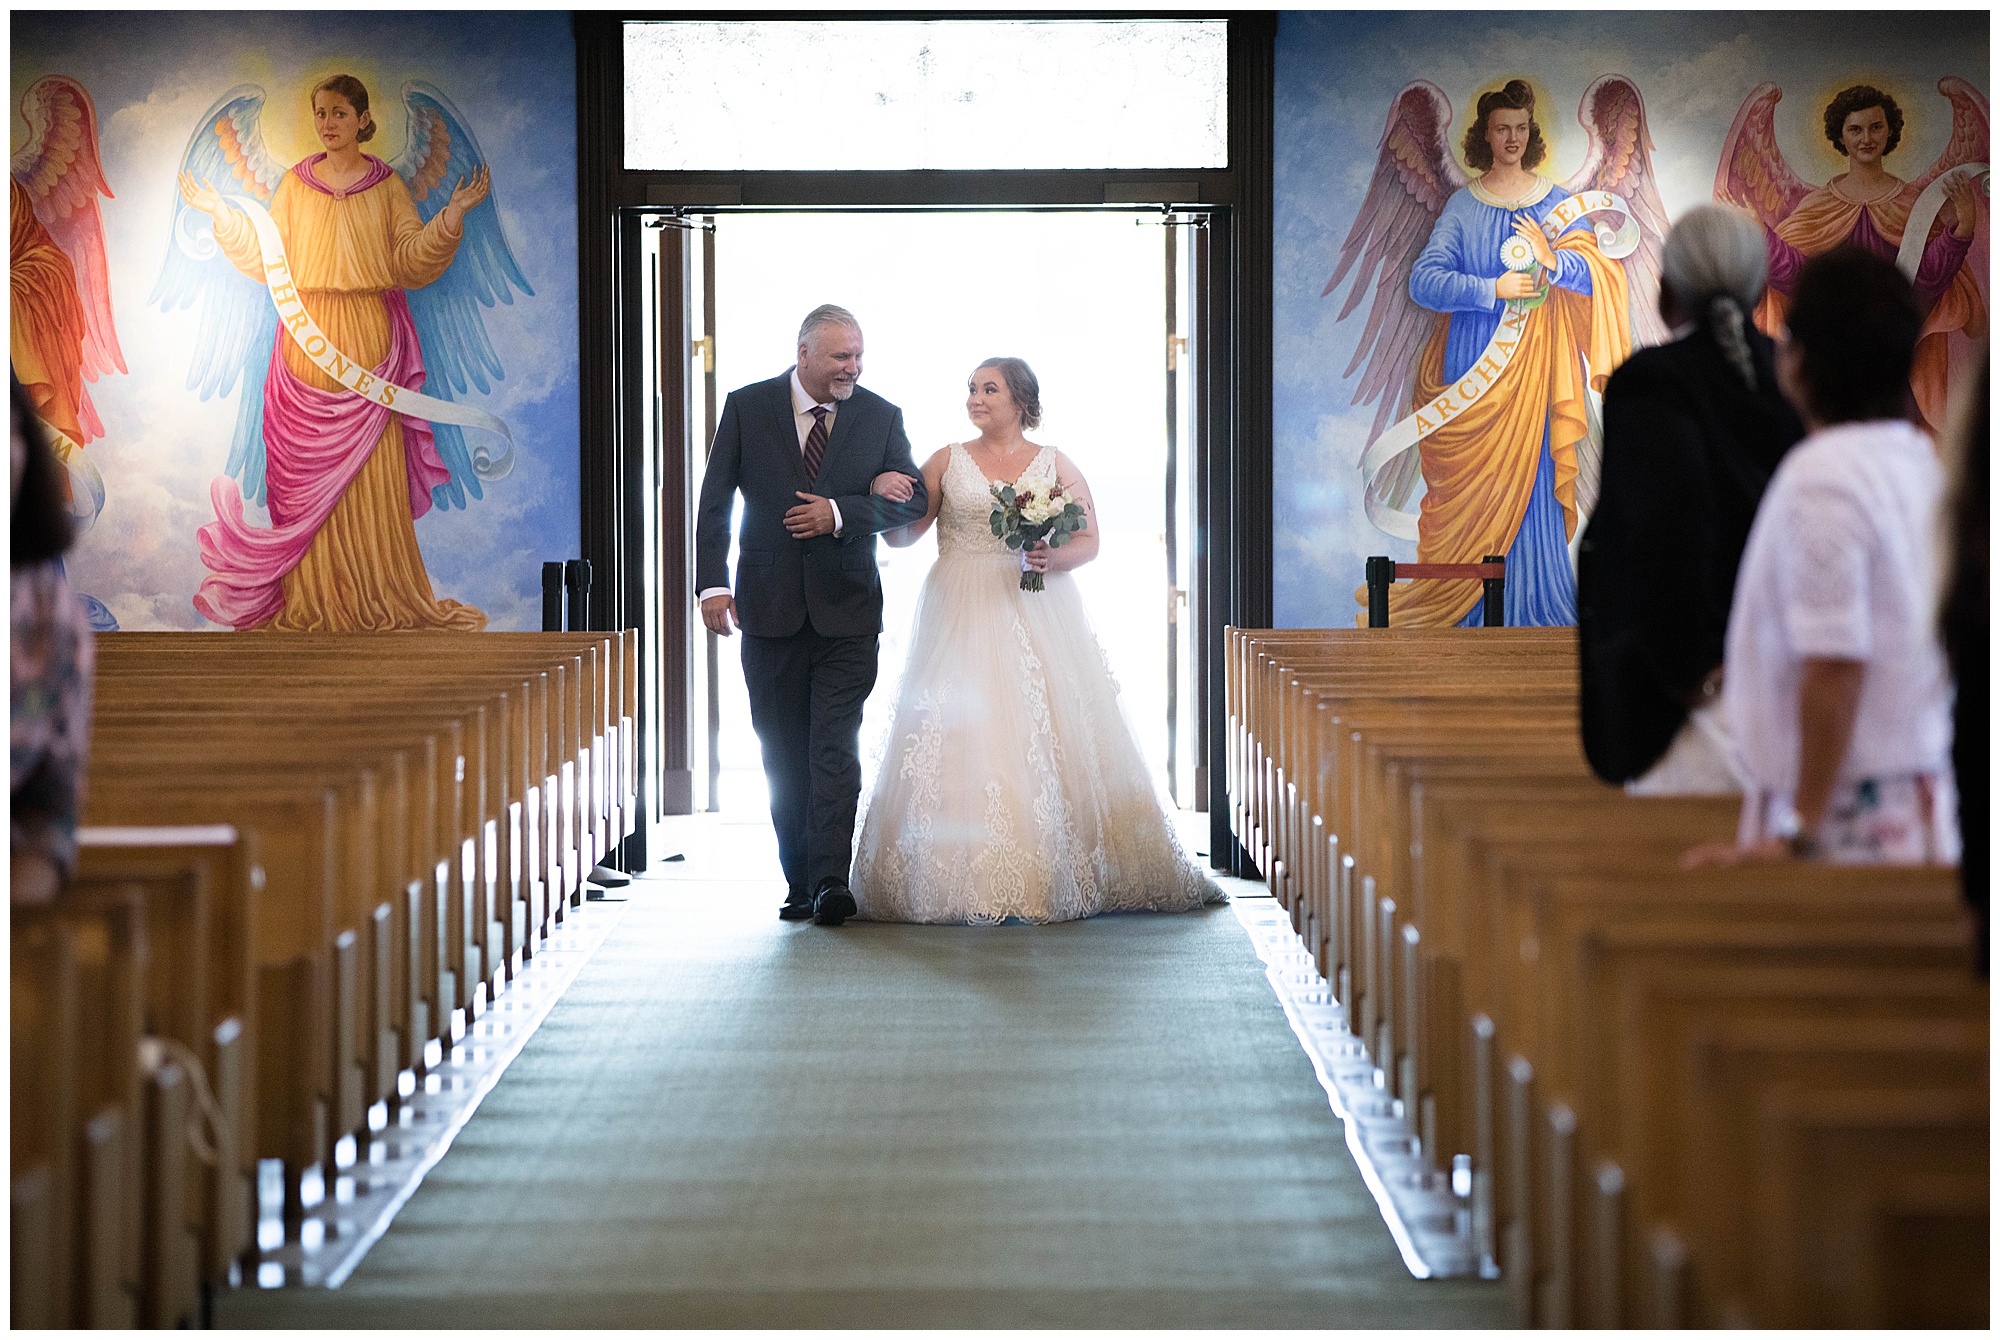 father is walking the bride down the aisle in catholic church wedding